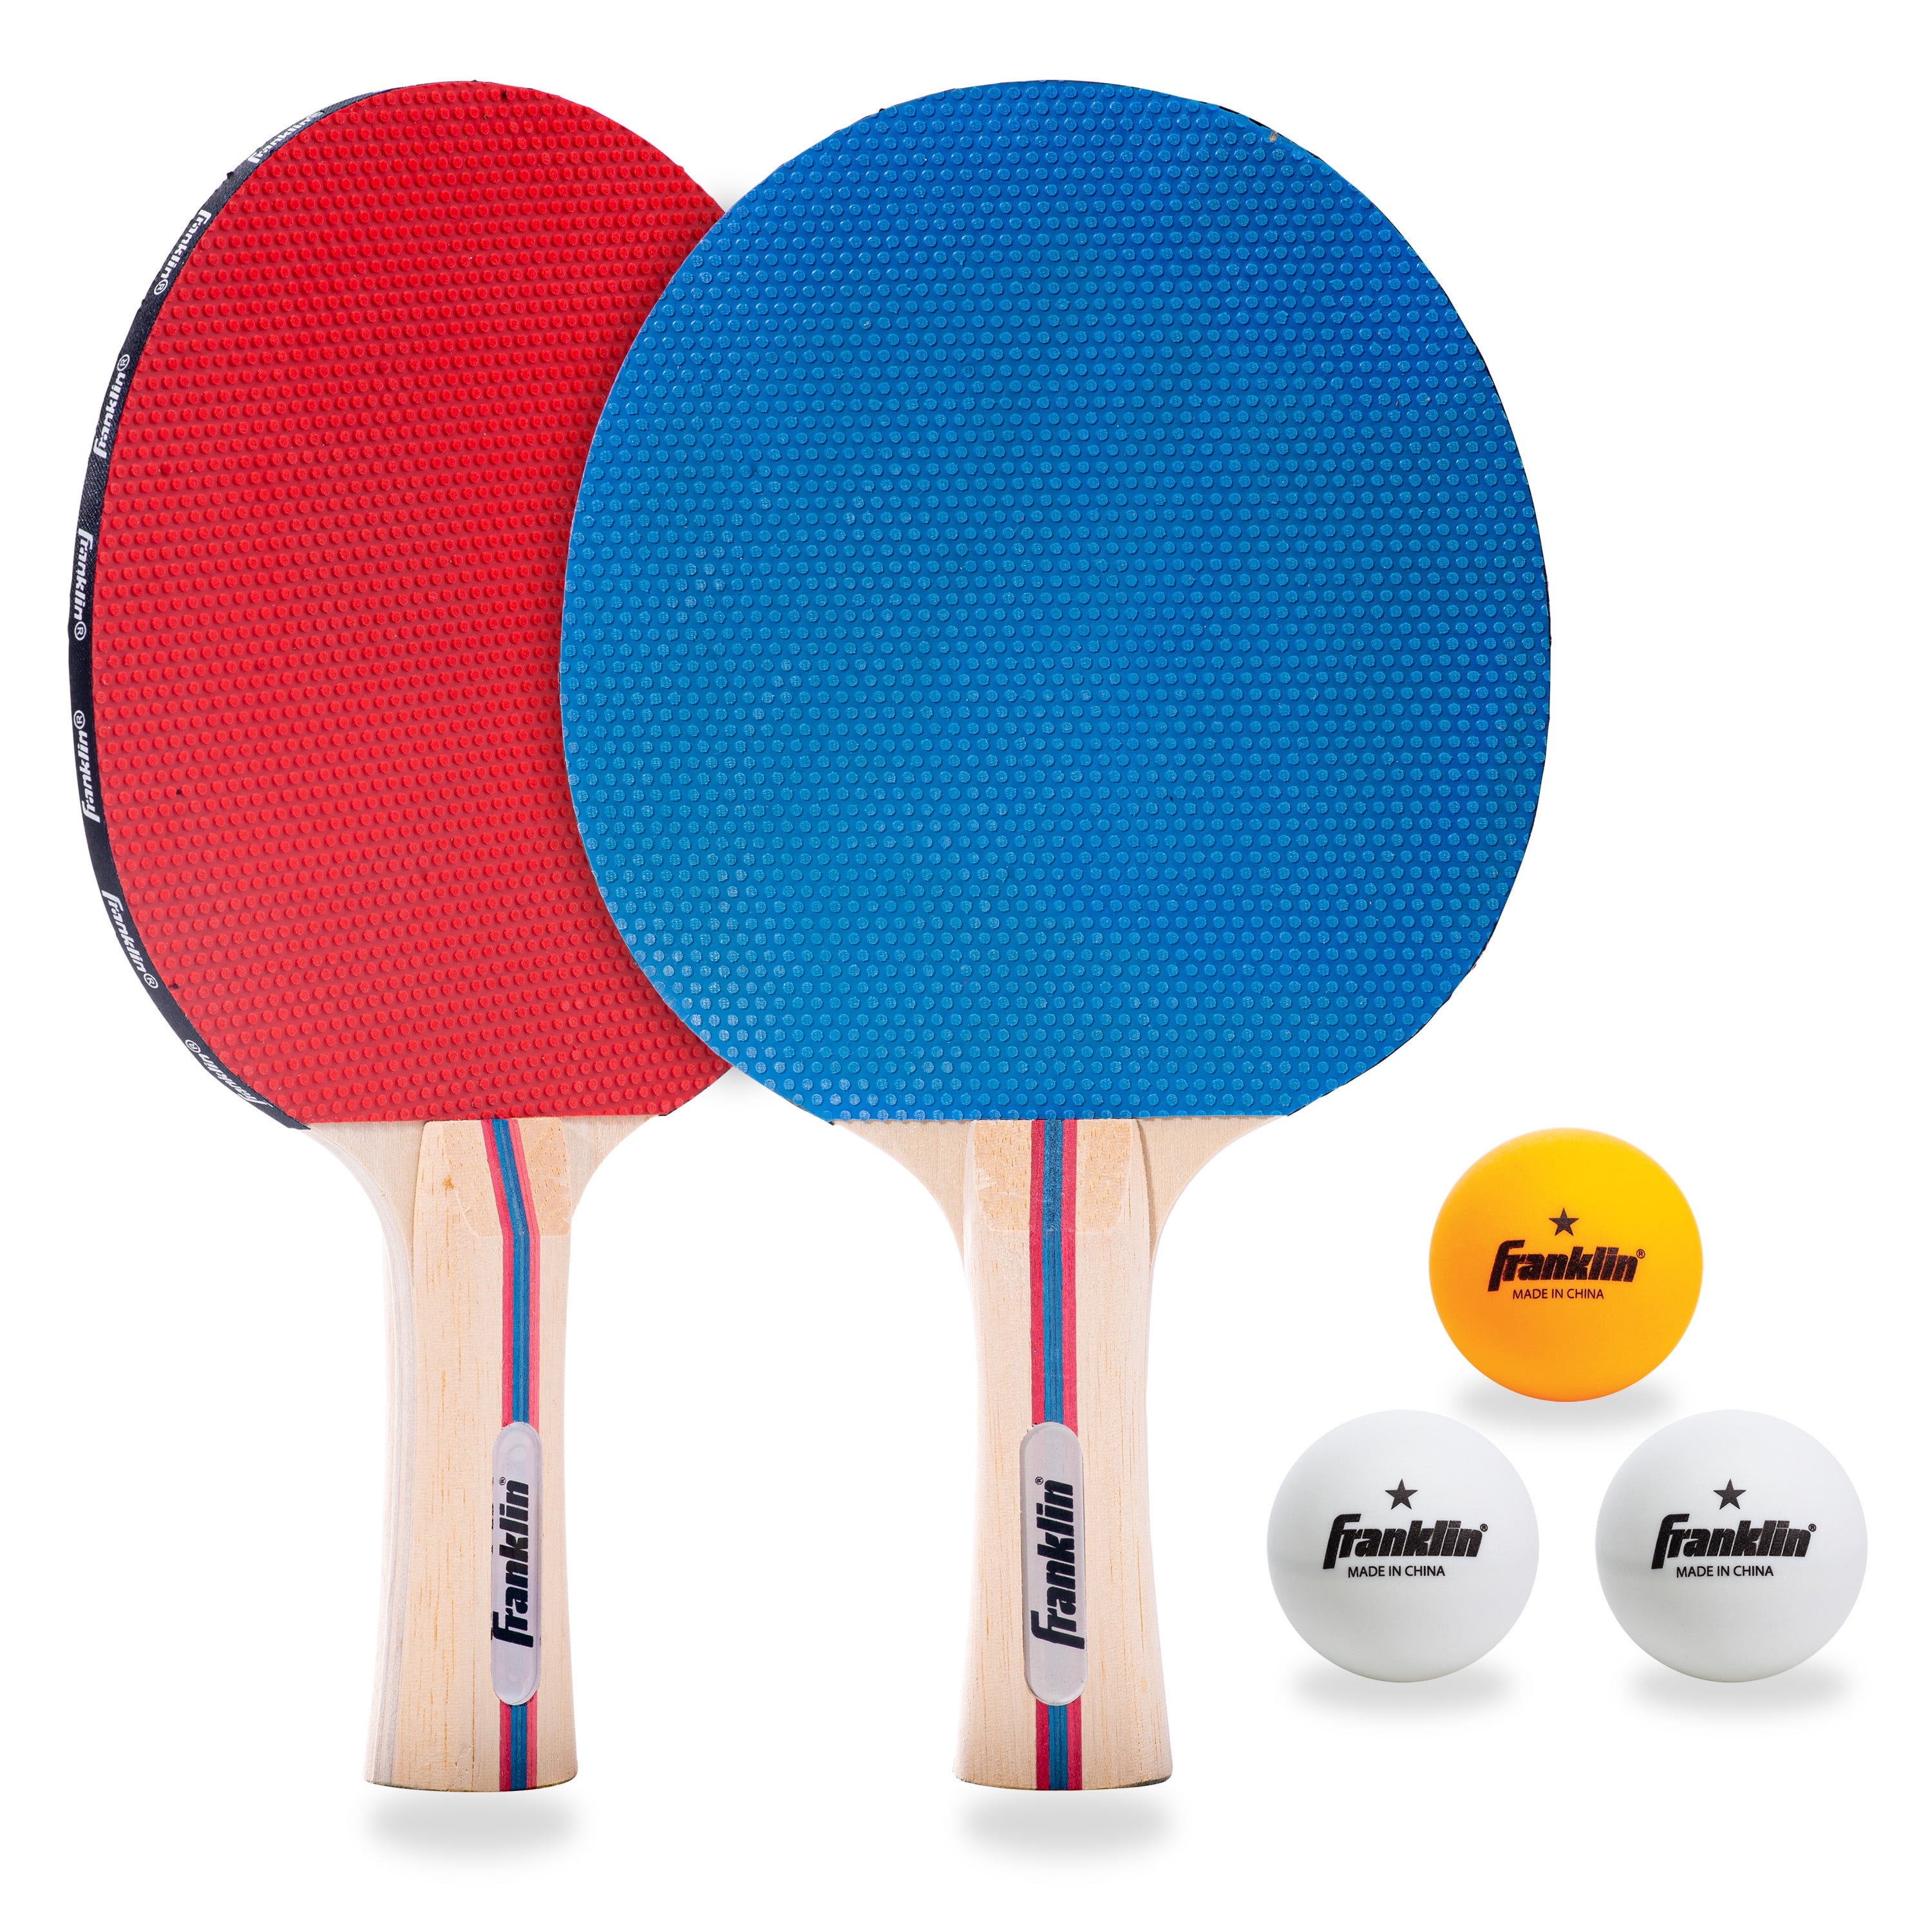 New Table Tennis Ping Pong Bat & Ball 2 Player Paddle Set Gift For Kids & Adult 